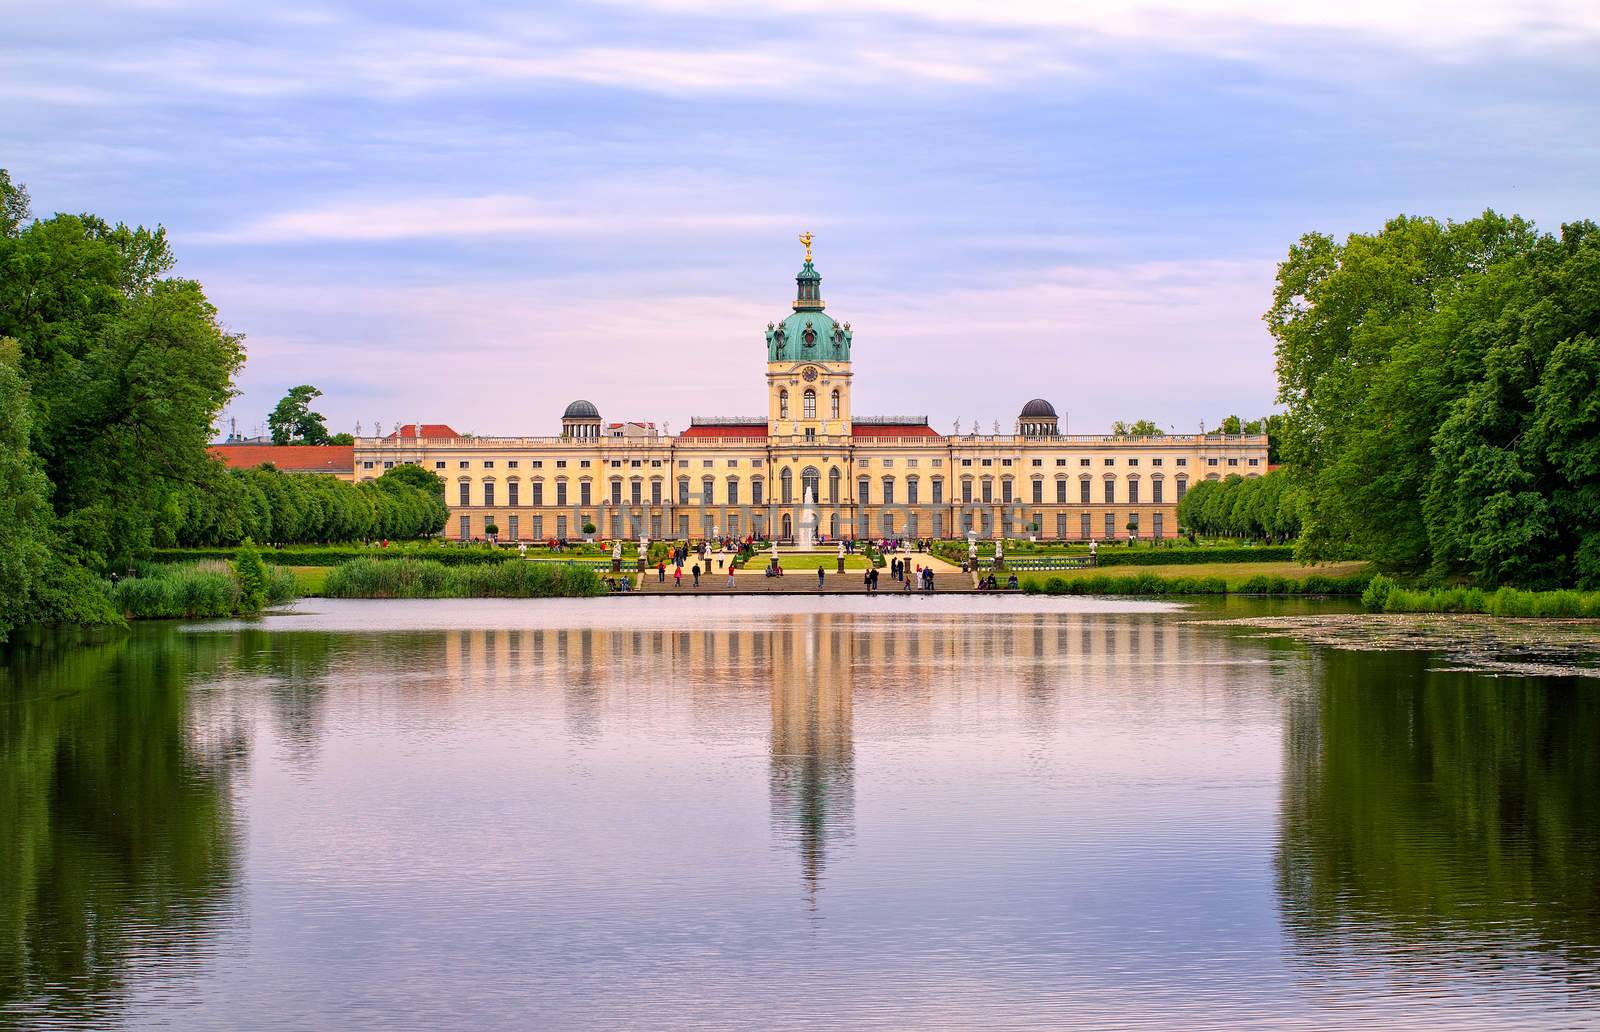 Charlottenburg royal palace in Berlin, Germany by GlobePhotos